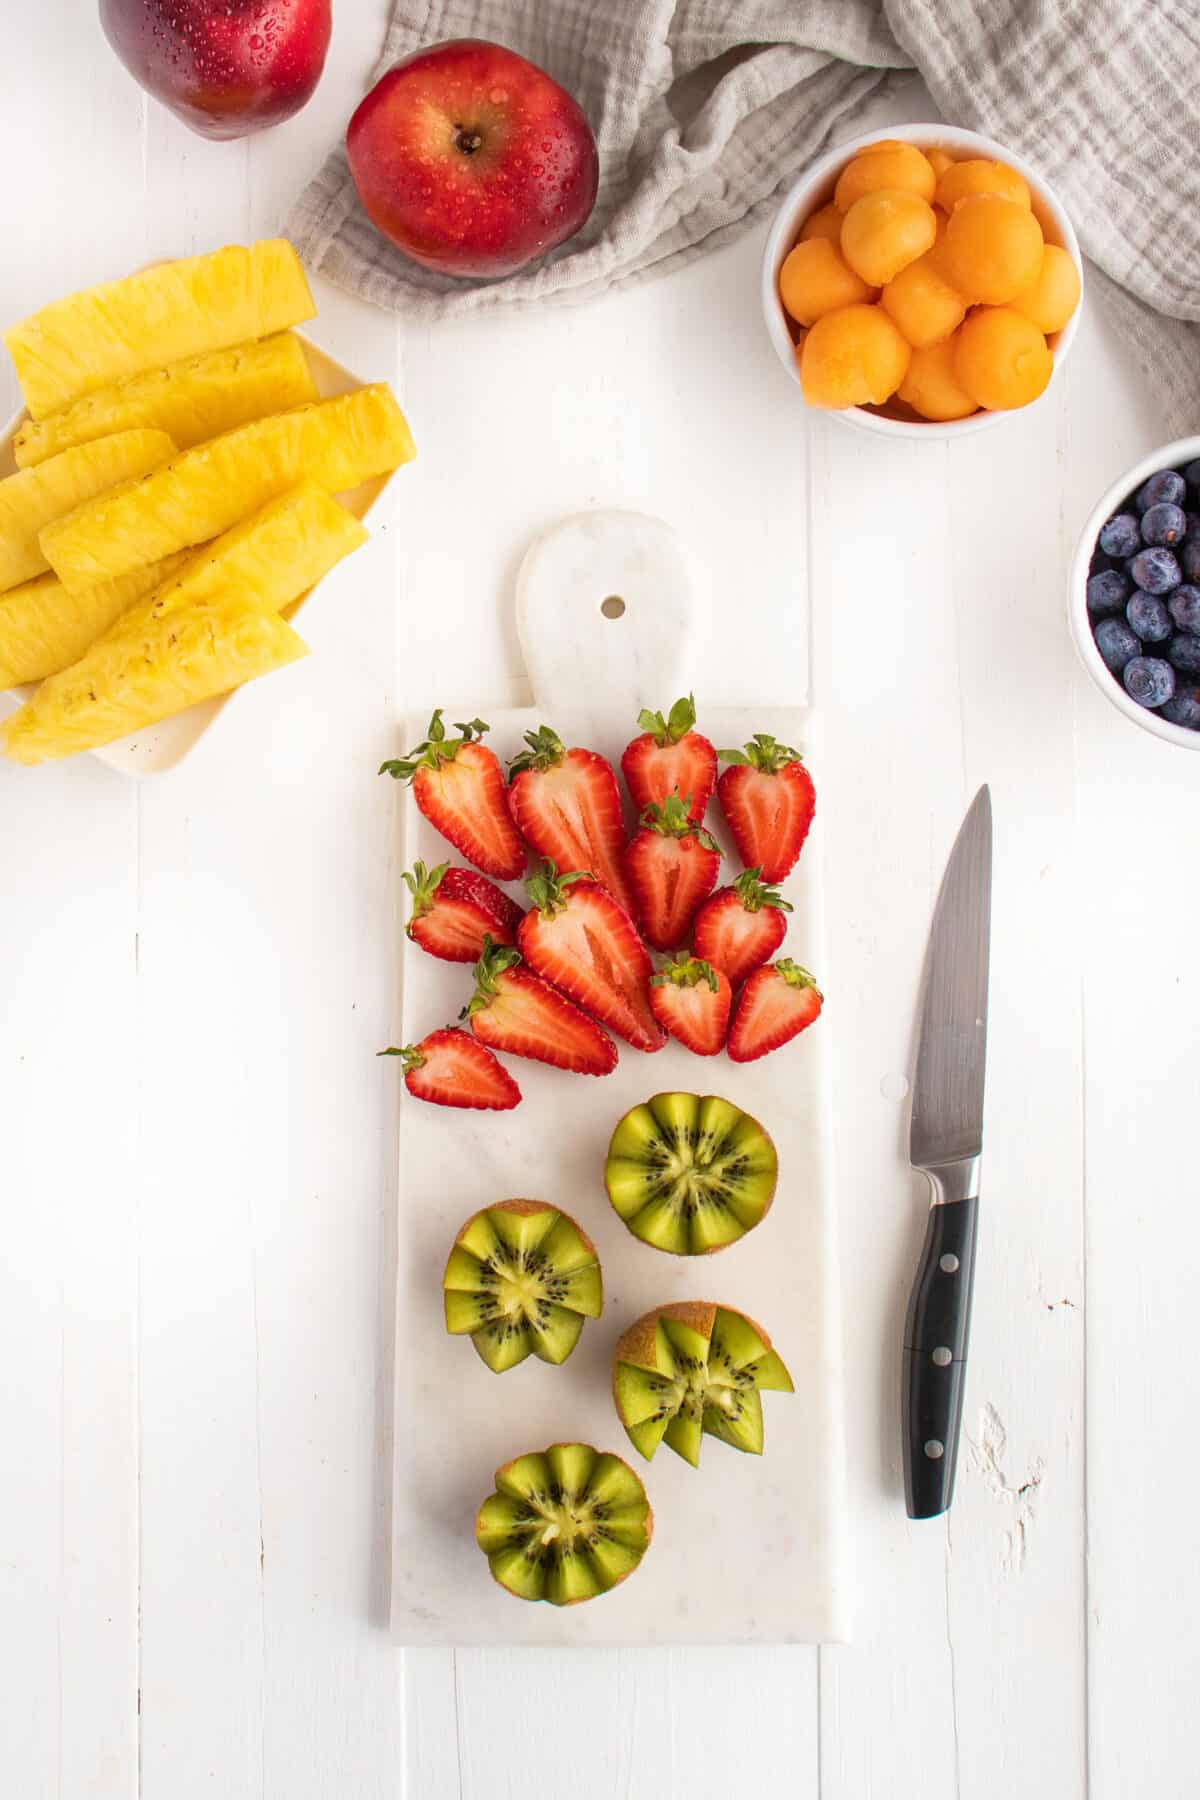 strawberries and kiwis with a knife on a white board